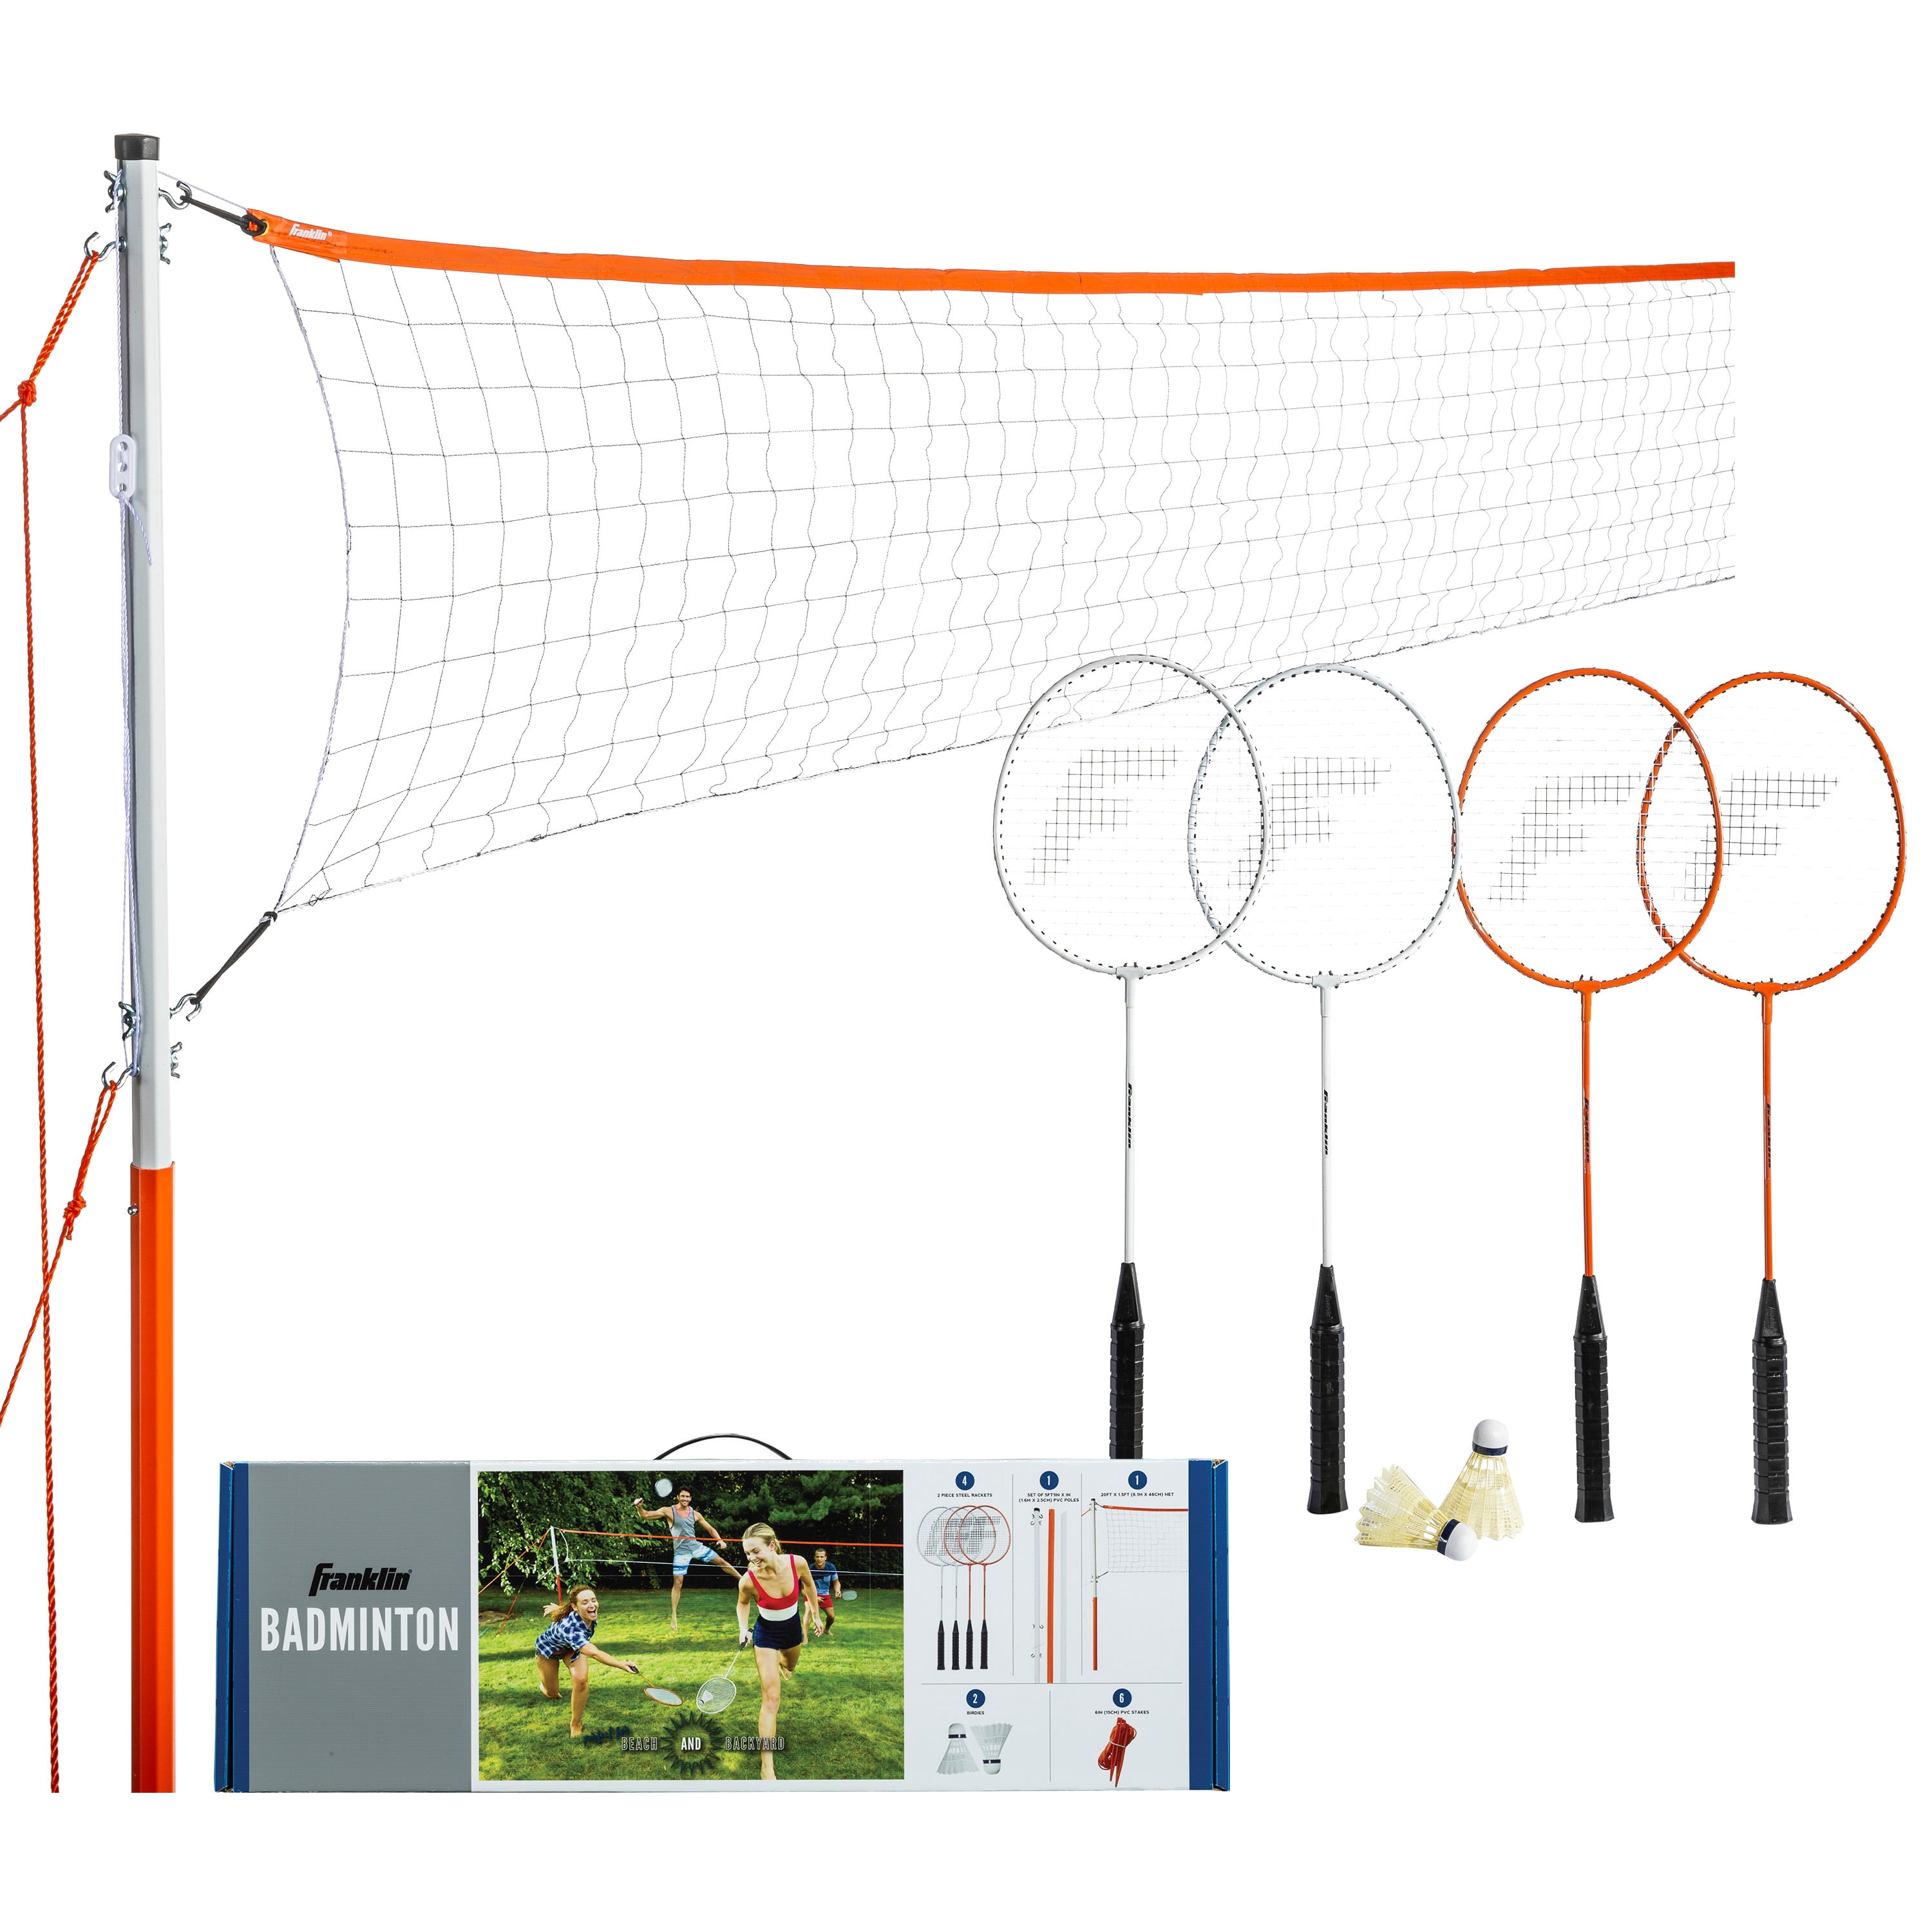 Complete Badminton Set with Net for Starter, Details about    Badminton Rackets Set of 4 